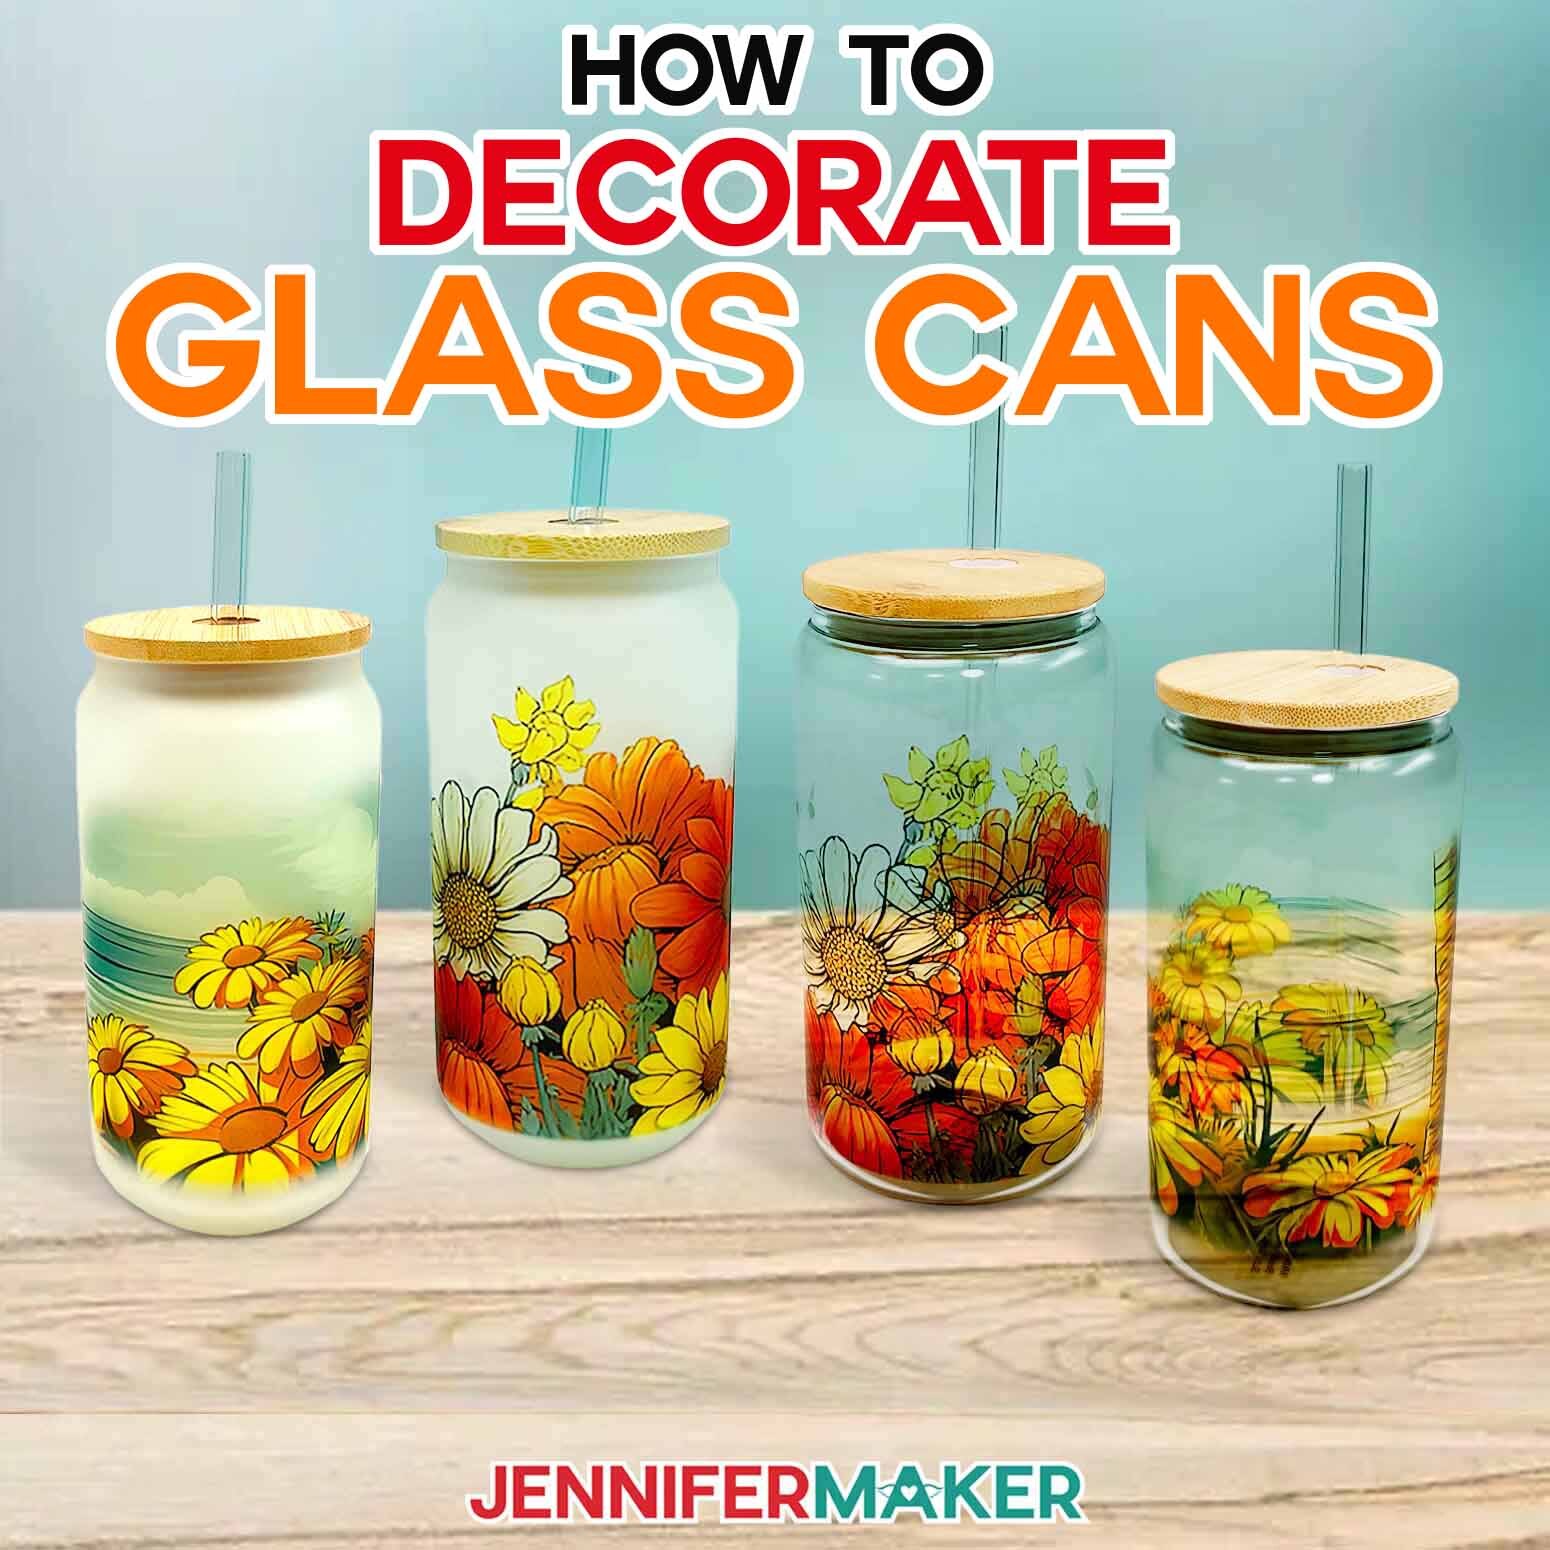 Learn how to make a sublimation beer can glass with Jennifer Maker's tutorial! Four beautiful sublimated beer can glasses featuring floral and beach images sit against a blue background.